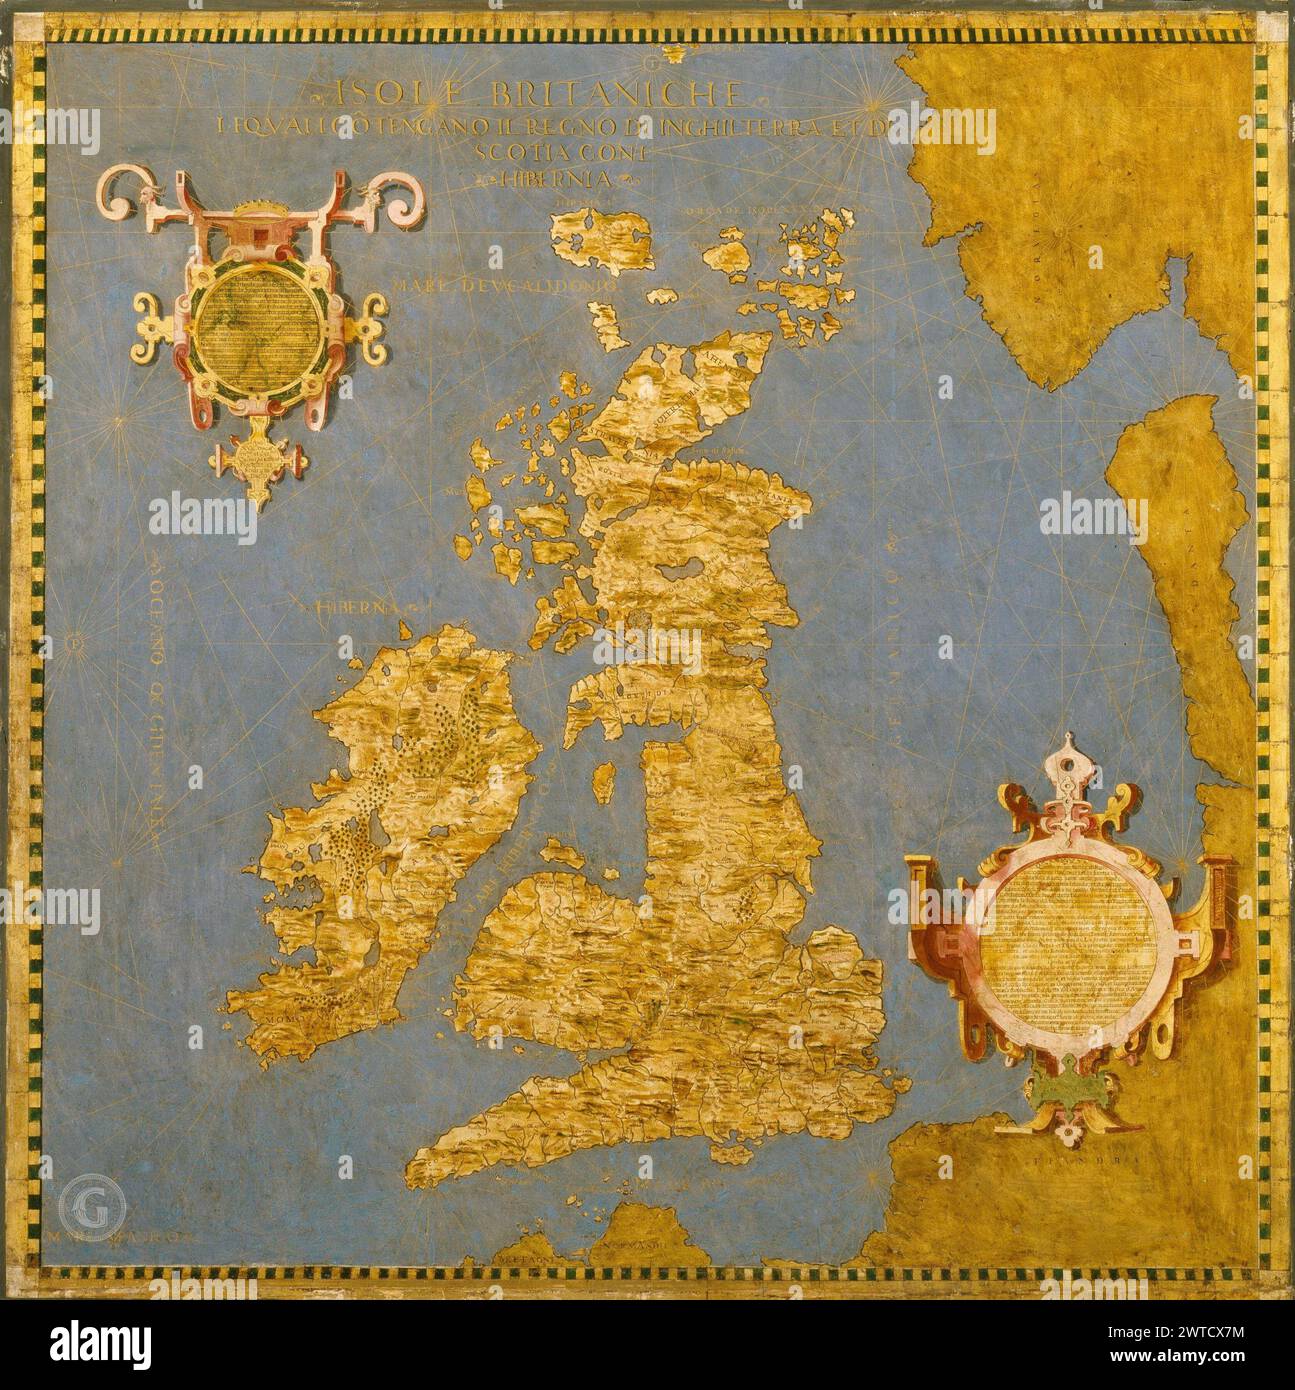 Antique world maps HQ – Map of Great Britain and Ireland Stock Photo